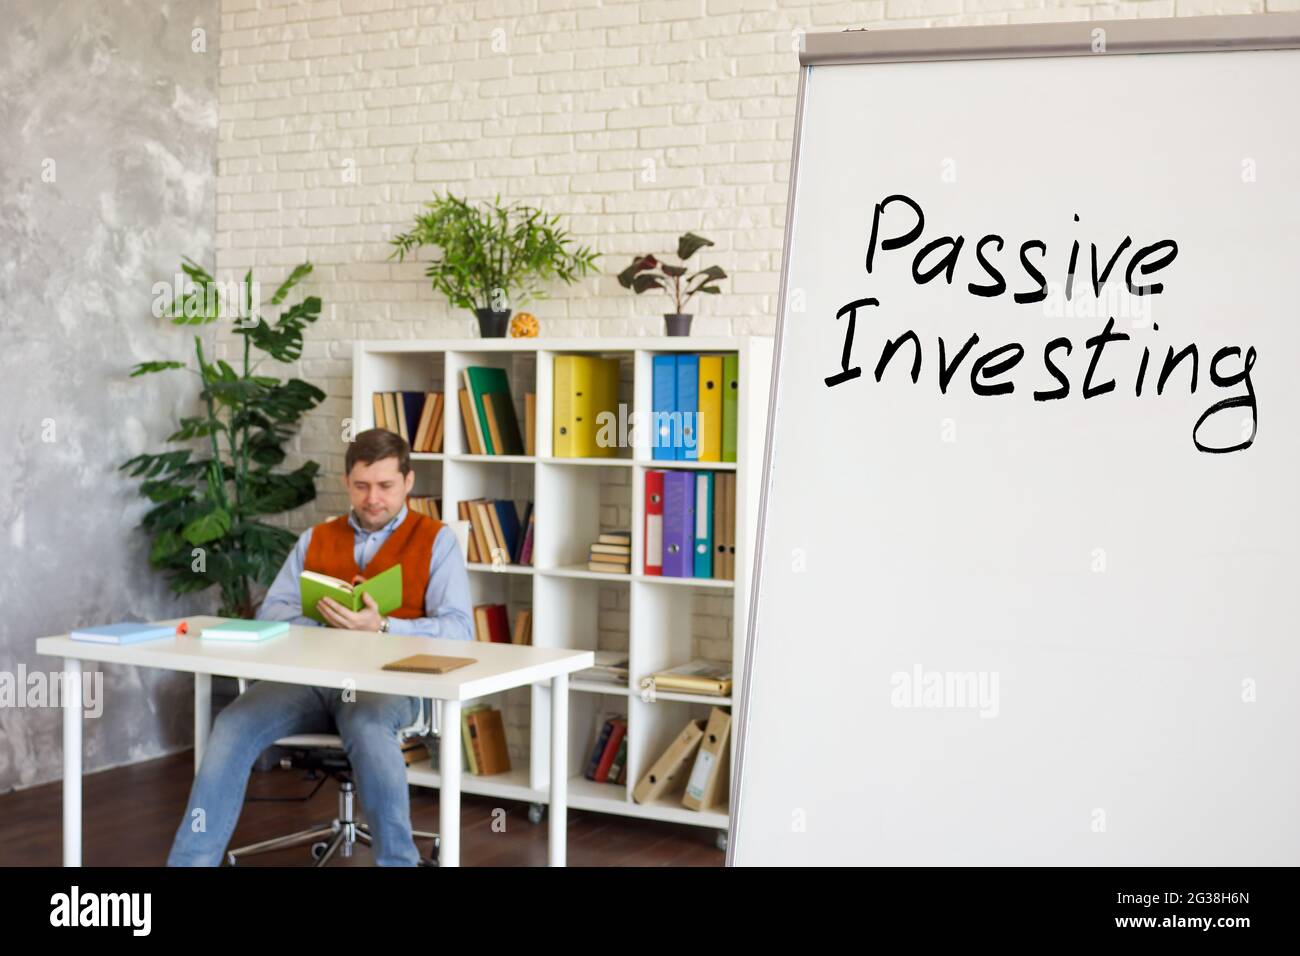 Passive investing words on the whiteboard in room. Stock Photo